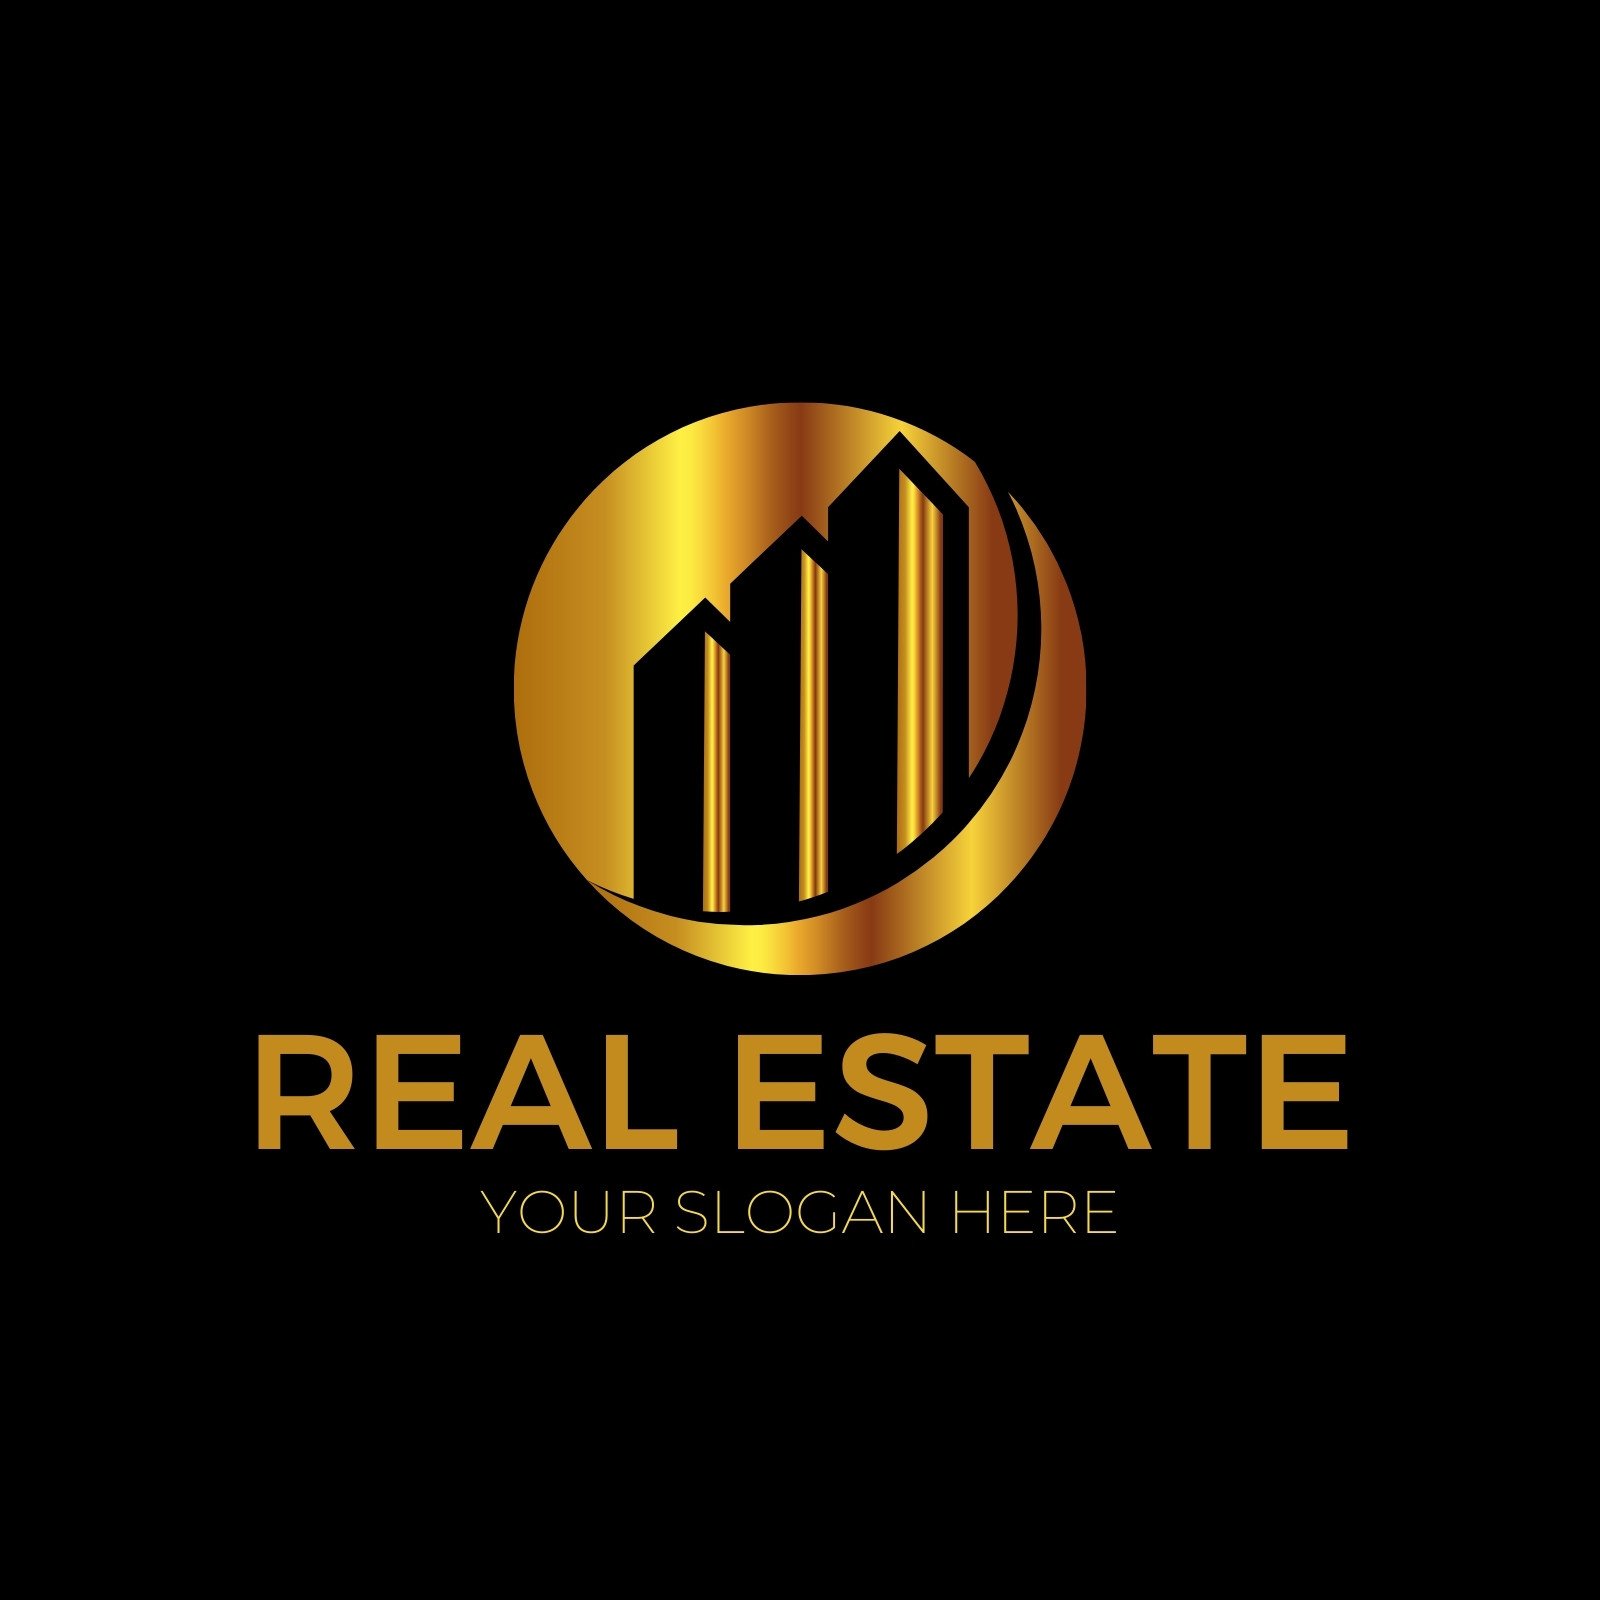 Free and customizable real estate logo templates